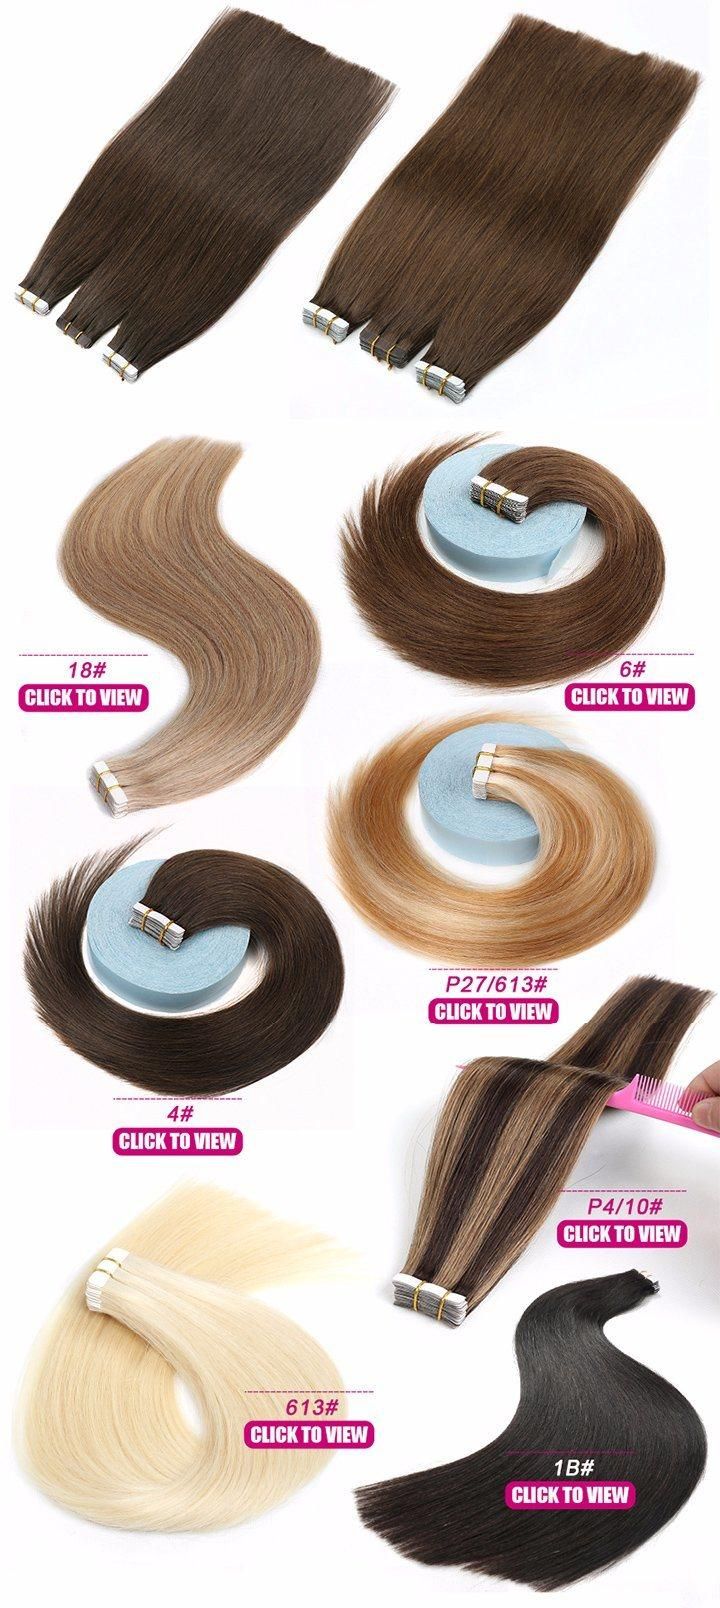 2018 Hot Selling Full Cuticle High Quality Natural Color Human Hair